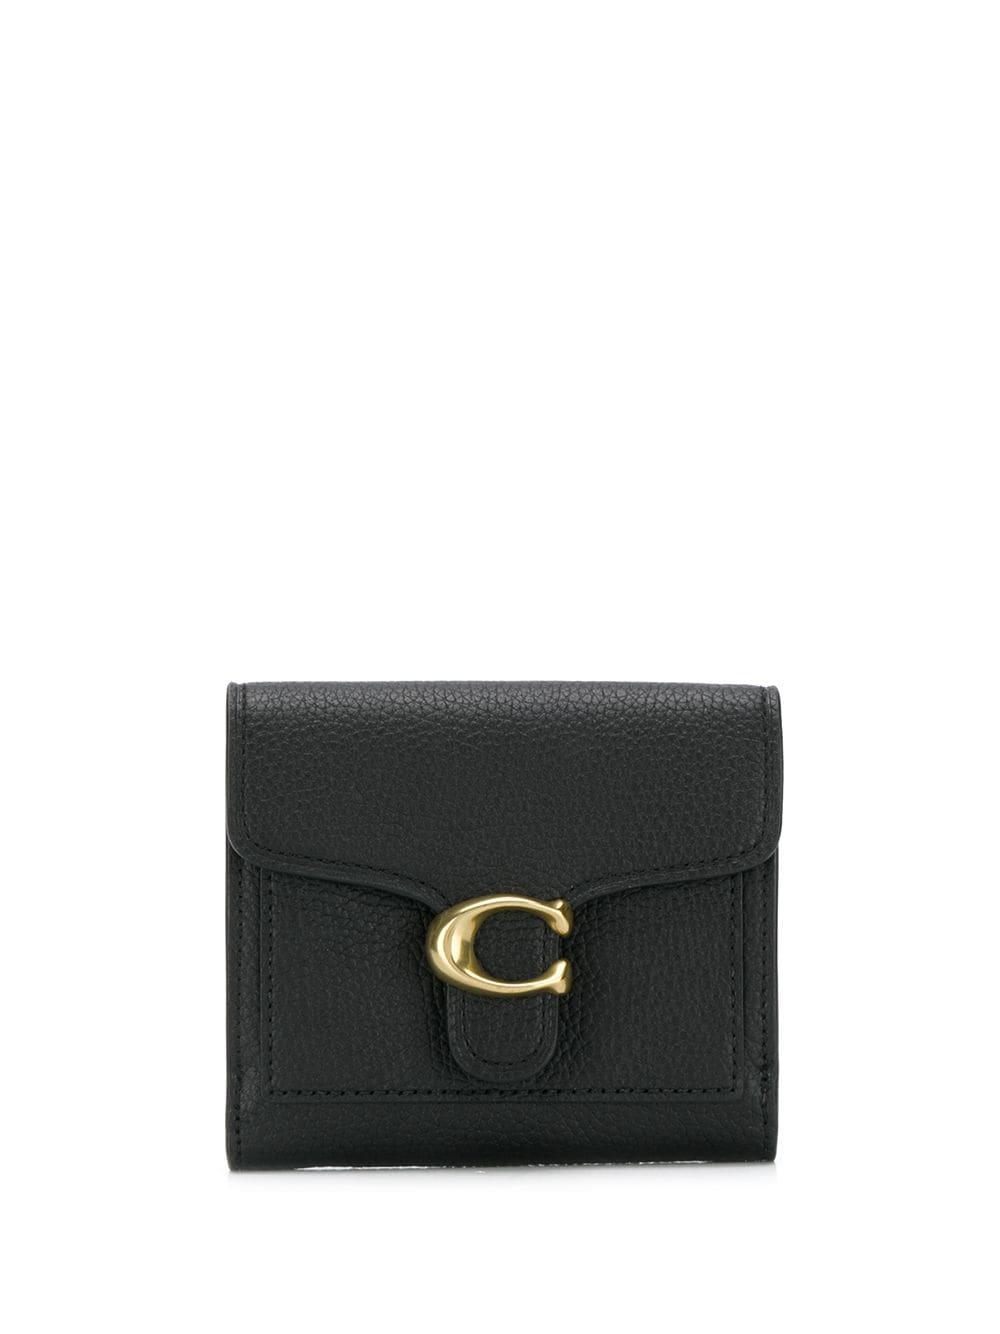 COACH Leather Tabby Small Wallet in Black - Lyst